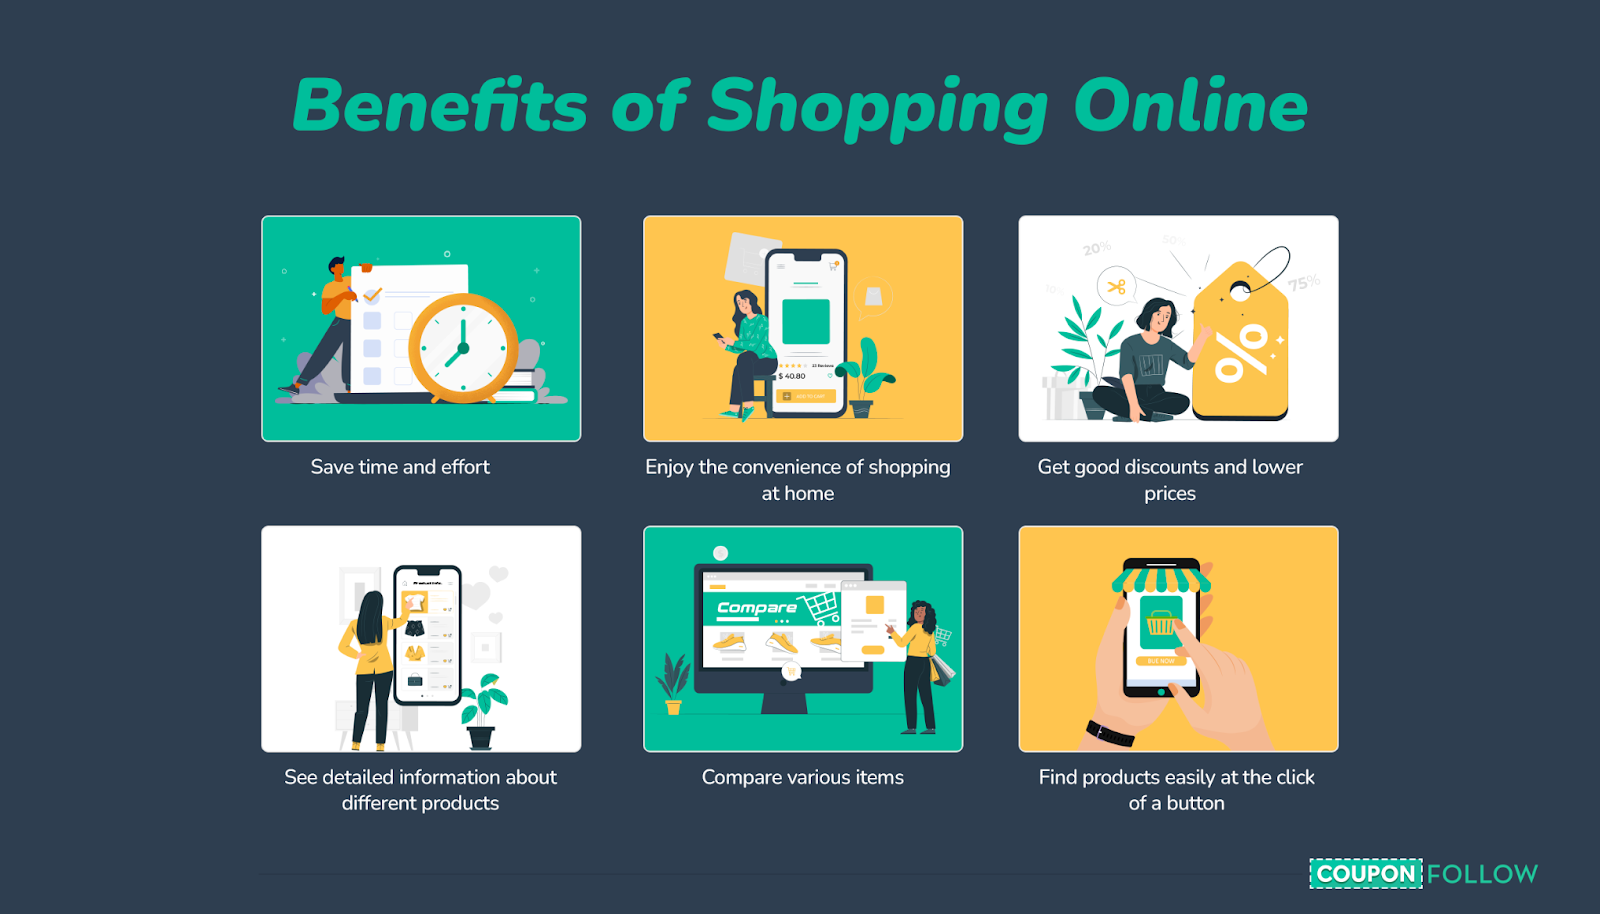 image showing a list of the benefits of shopping online